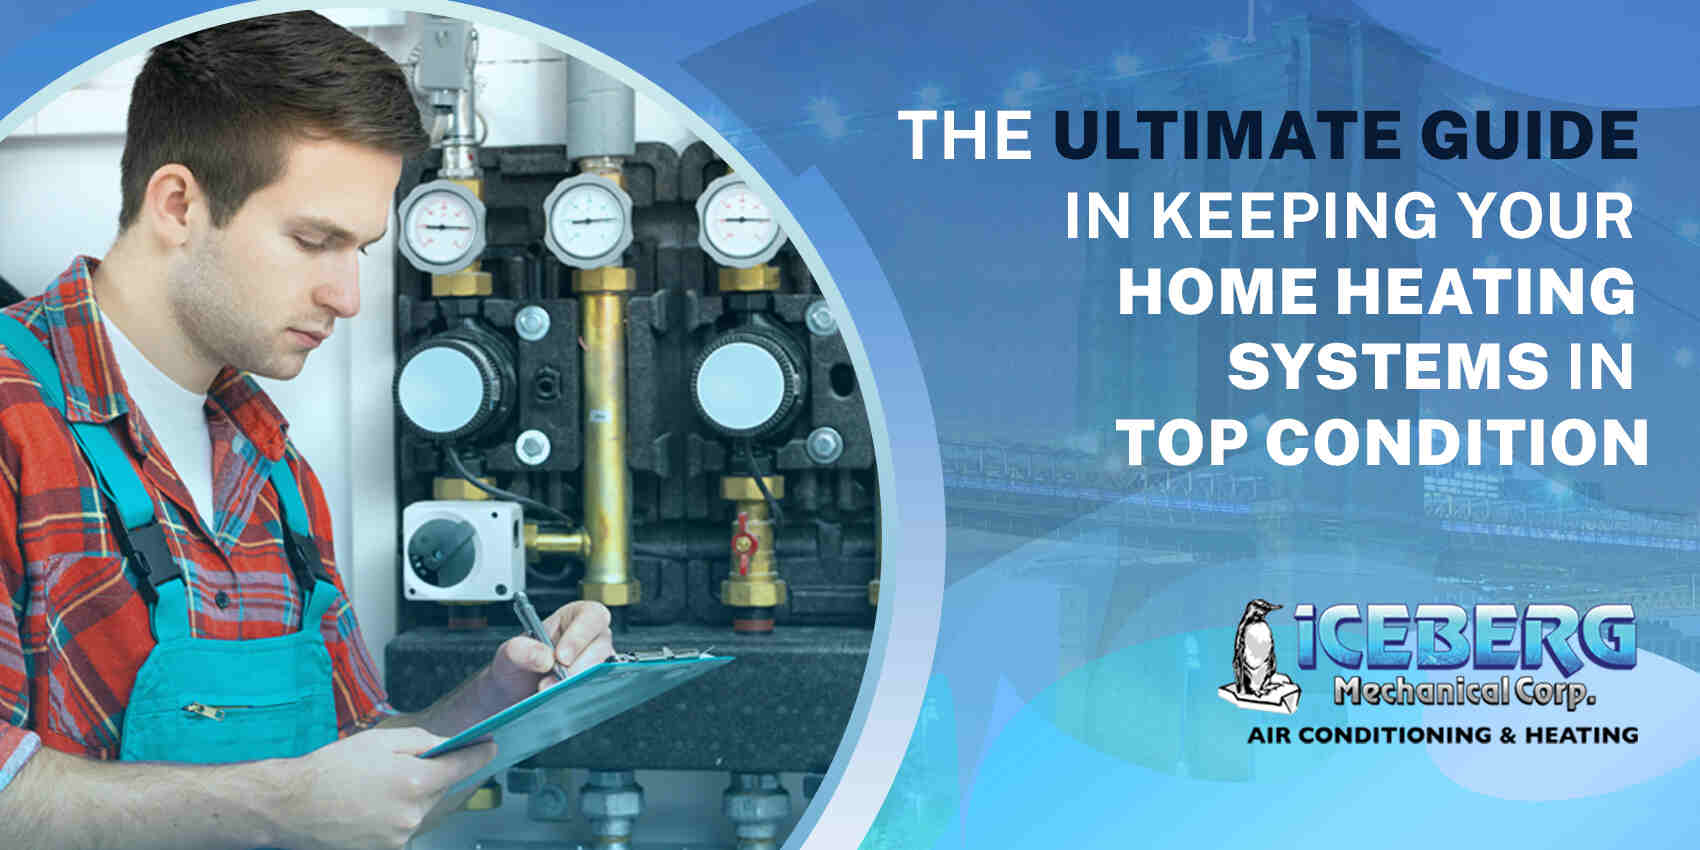 The Ultimate Guide in Keeping Your Home Heating Systems in Top Condition